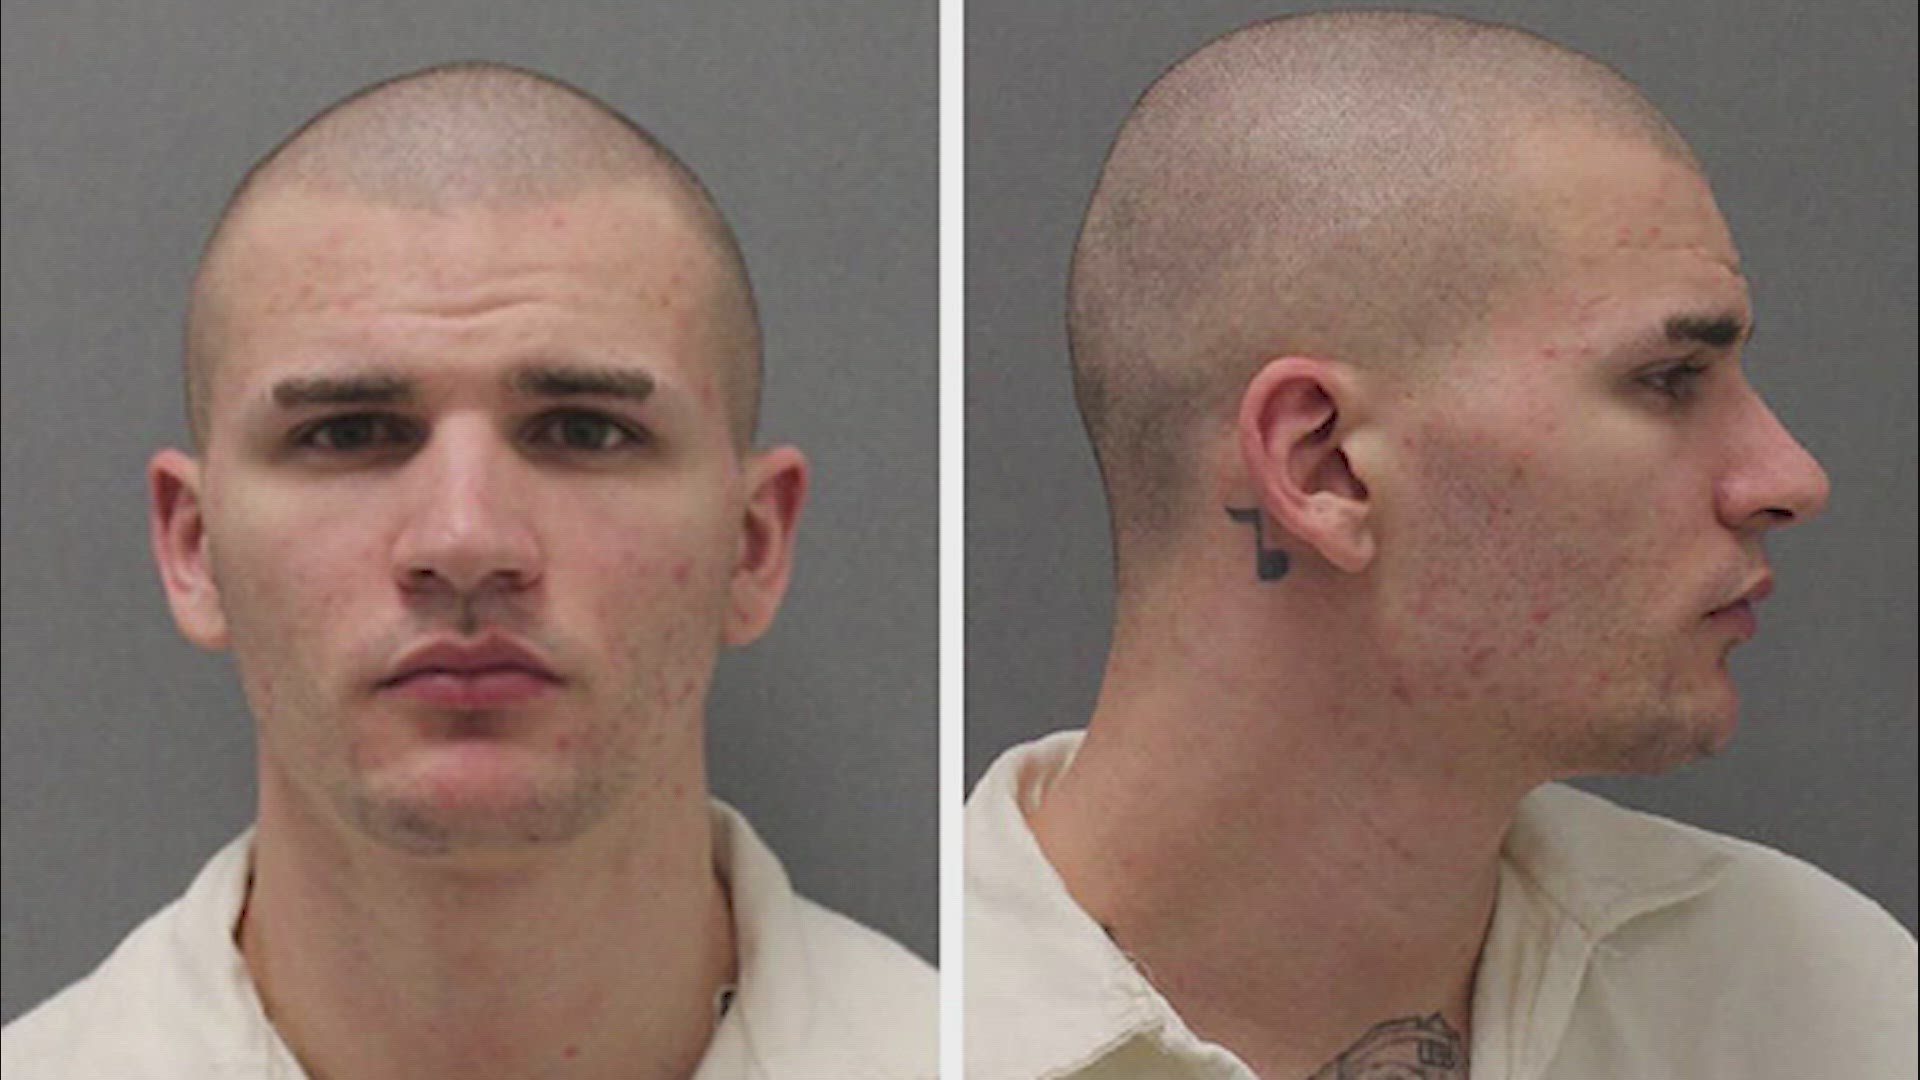 Officials say Trent Thompson escaped from Formby State Jail late Saturday night.